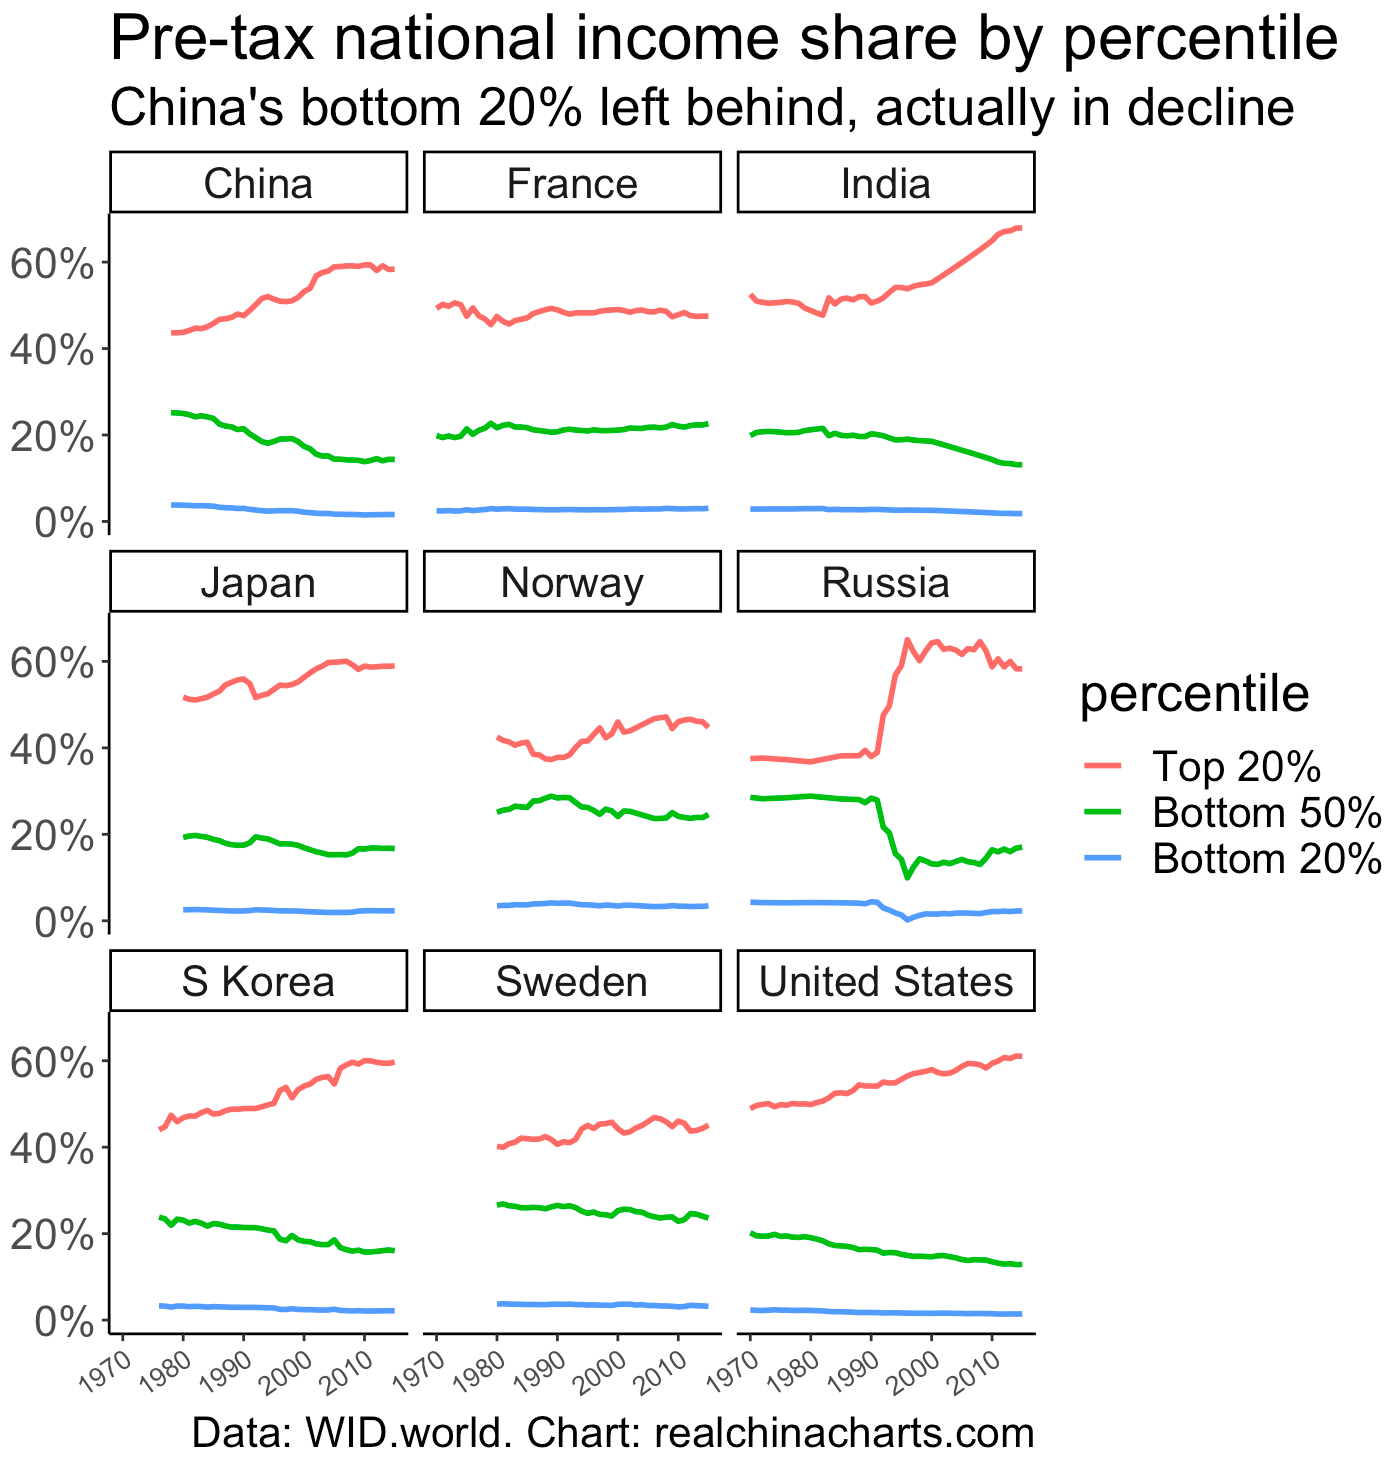 National income shares by percentile for a basket of countries